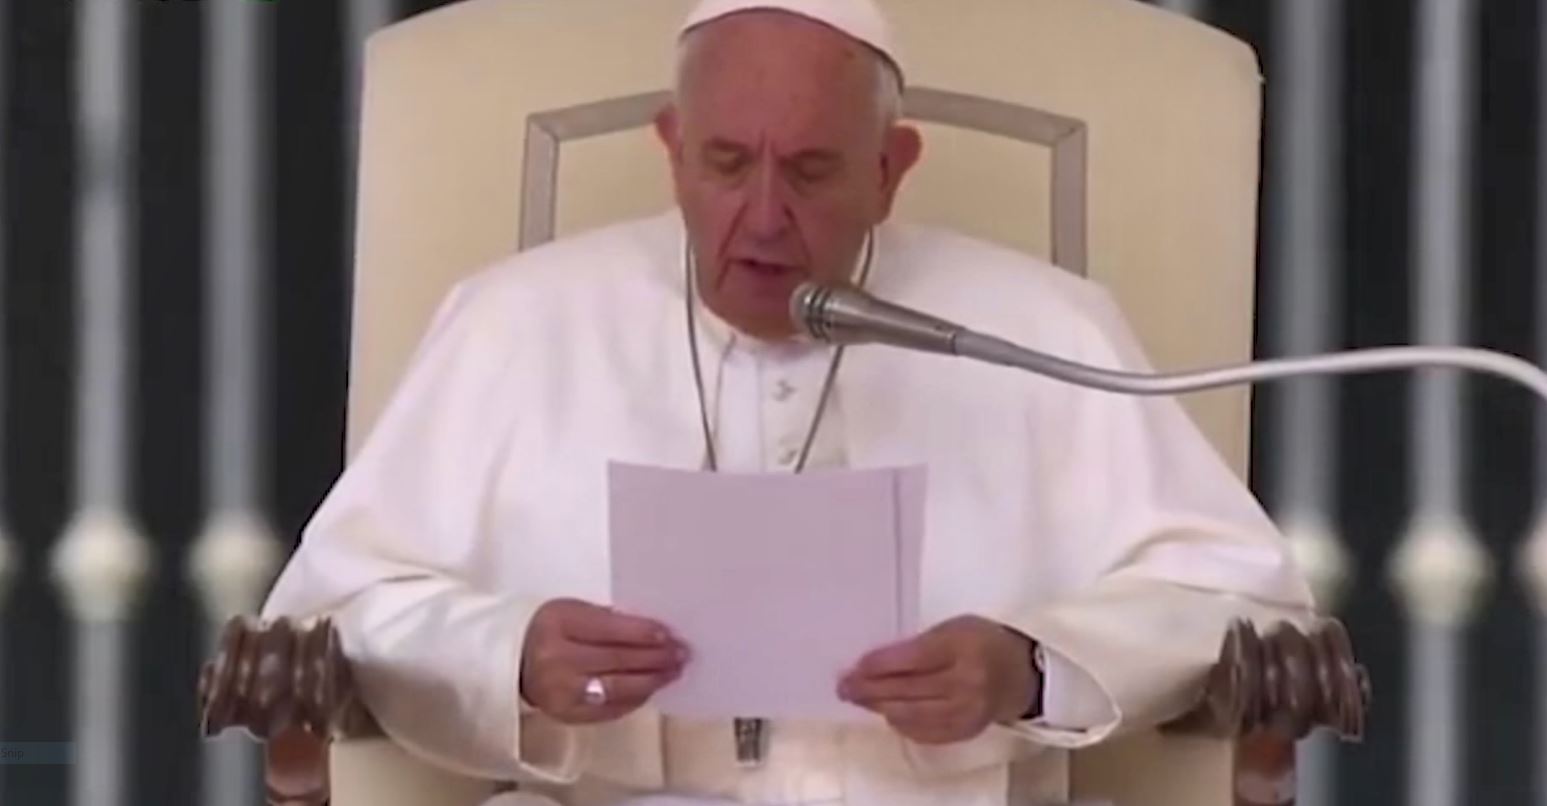 Pope Francis says he is close to the beloved Albanian people, praying for the victims and their families